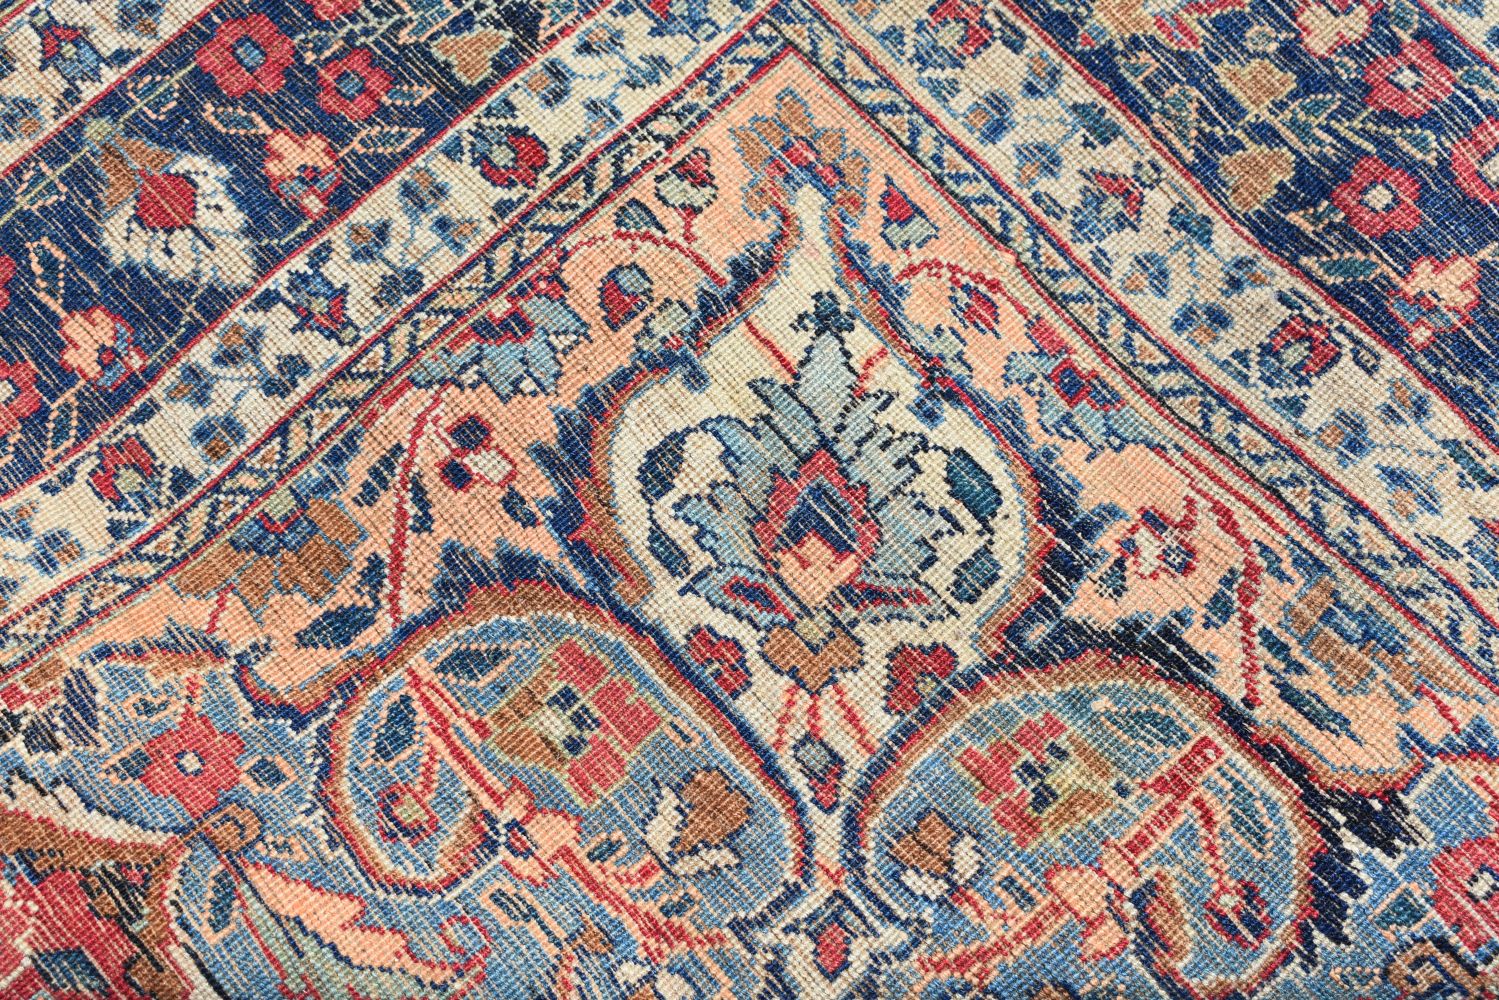 A Persian rug 189 x 122 cm - Image 10 of 14